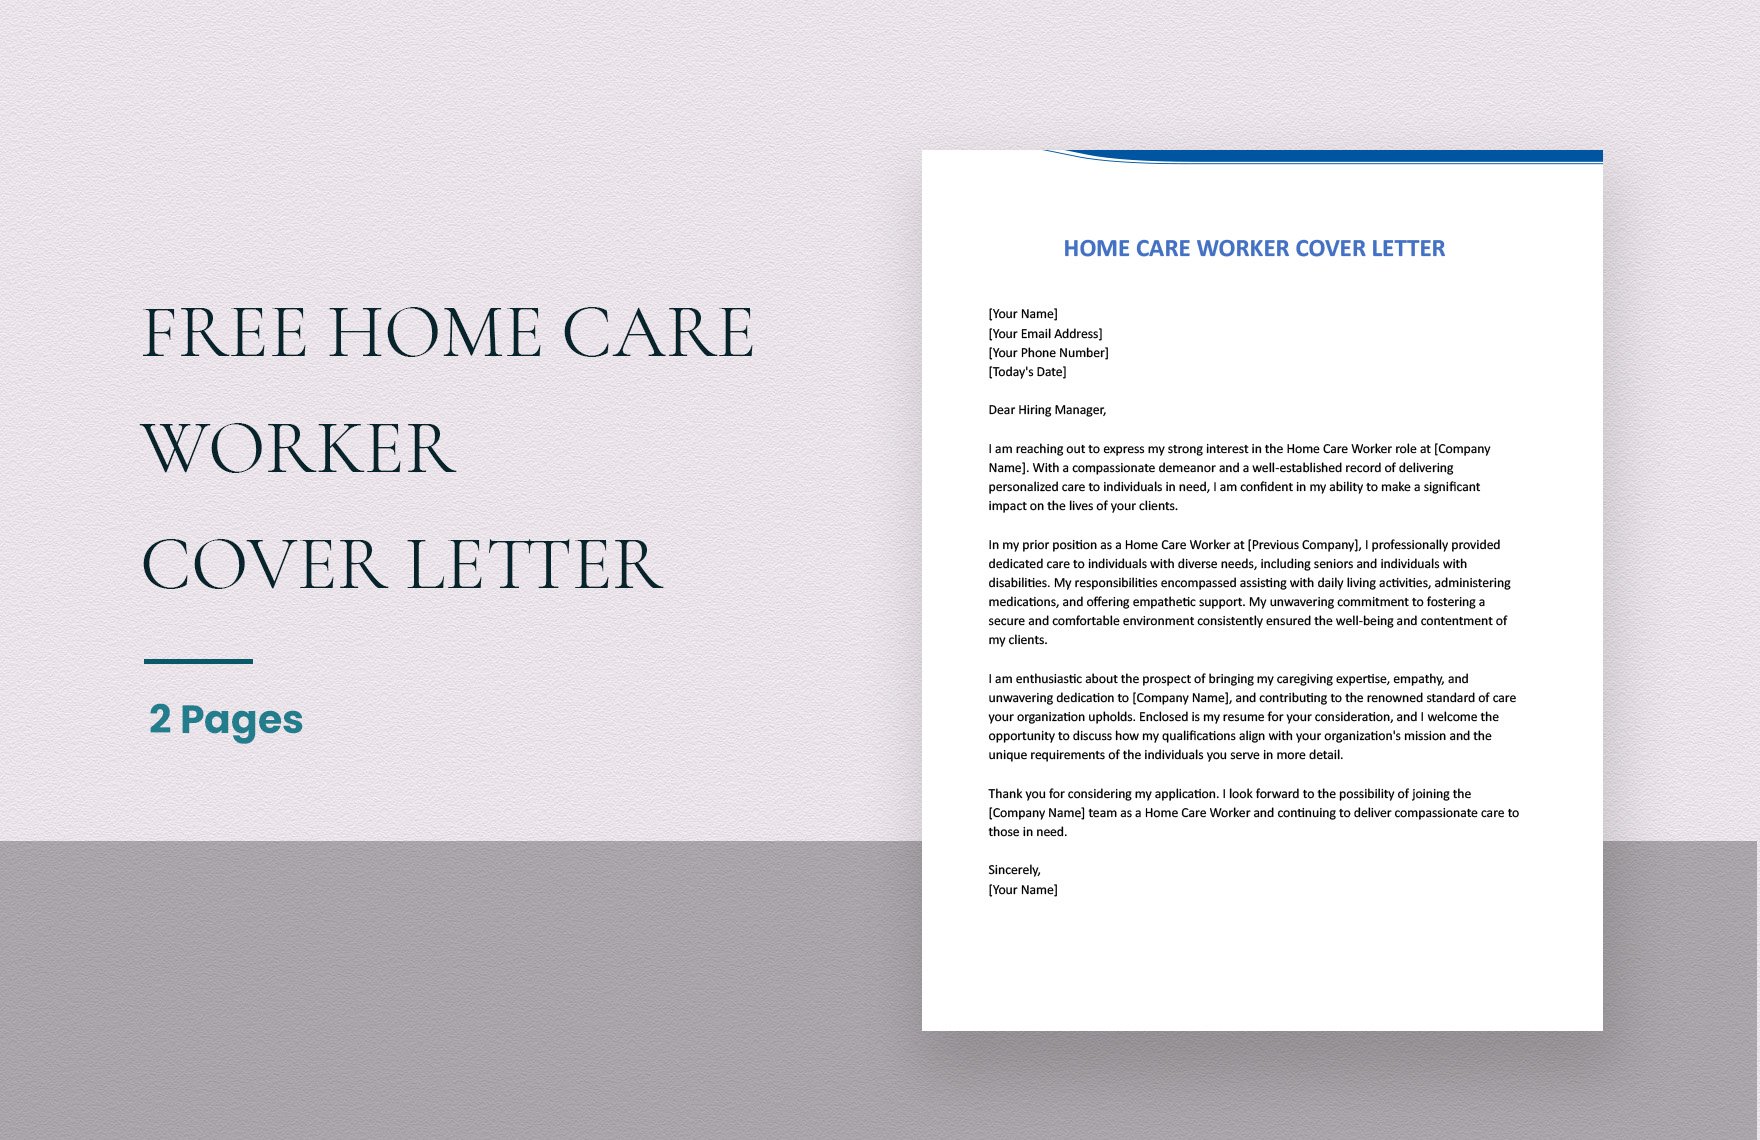 Home Care Worker Cover Letter in Word, Google Docs